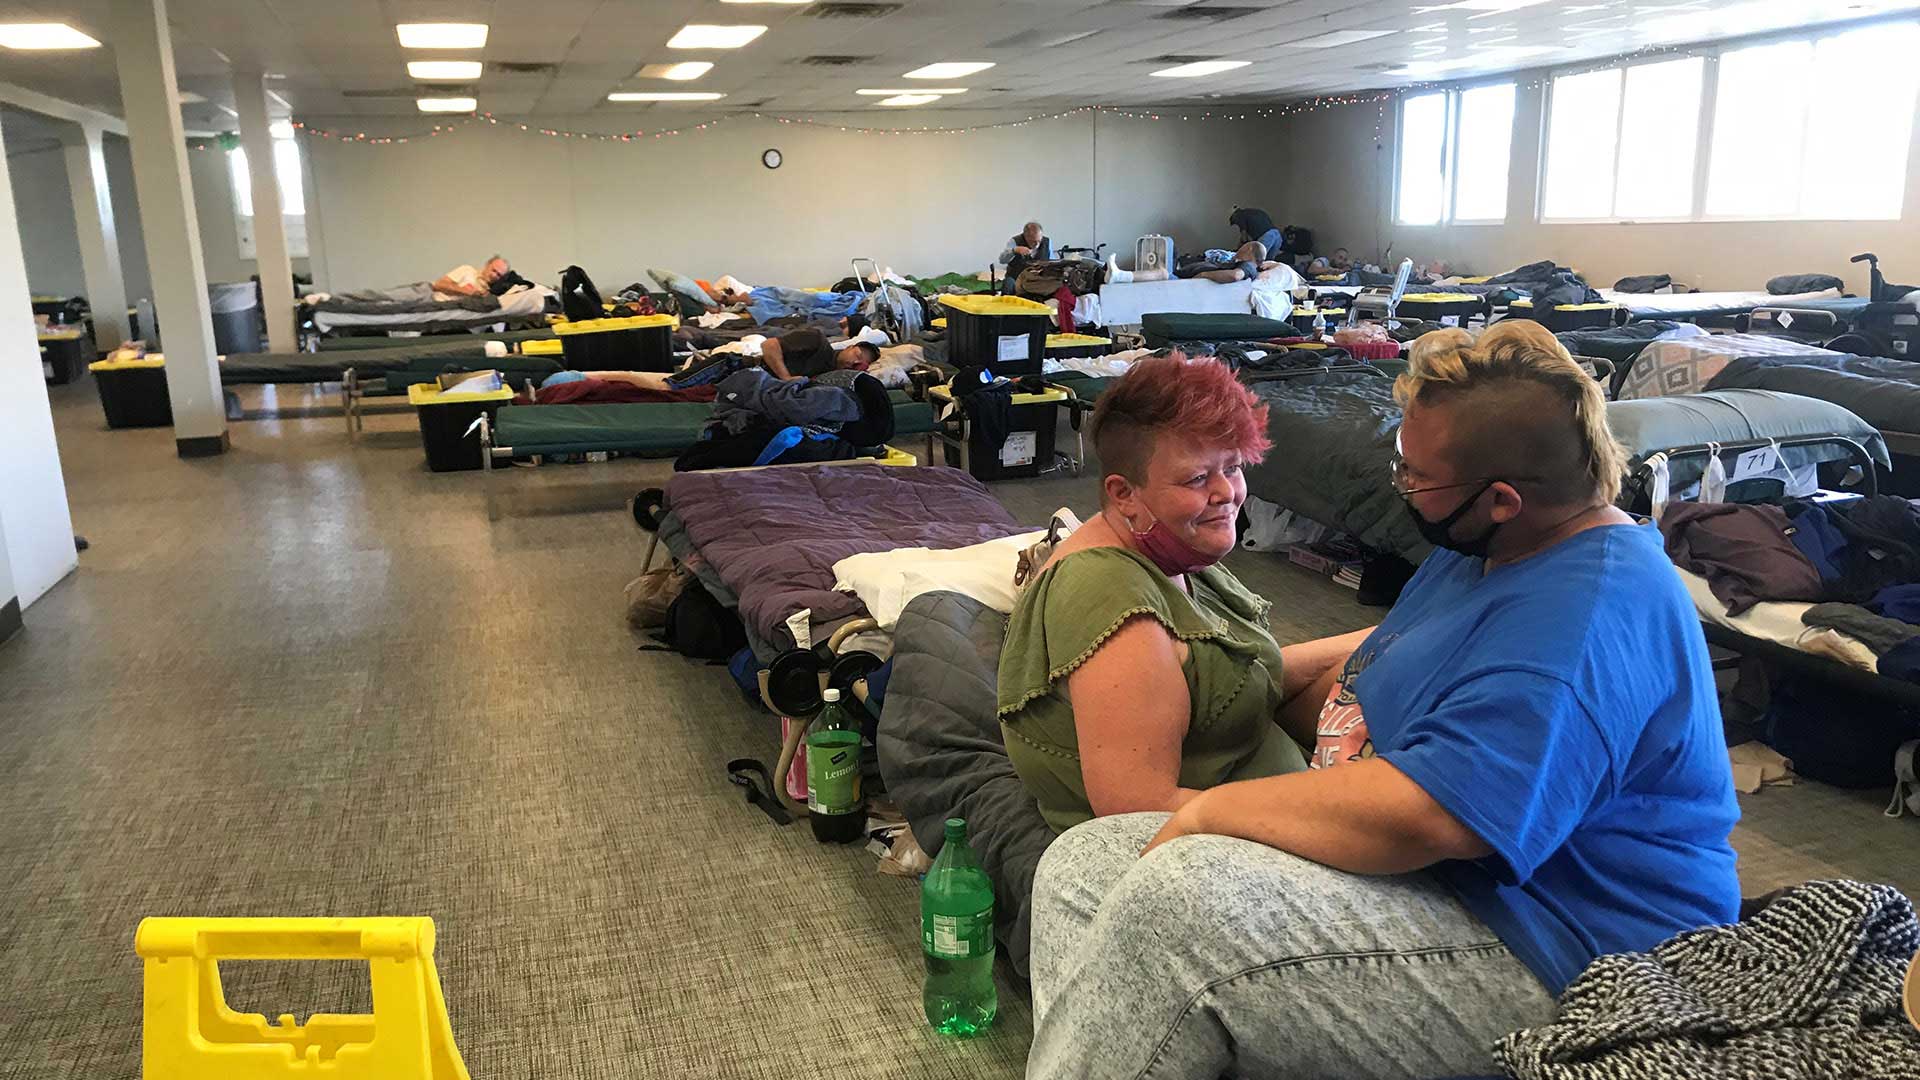 Shelter Offers “Way Out” of Homelessness City of Spokane, Washington